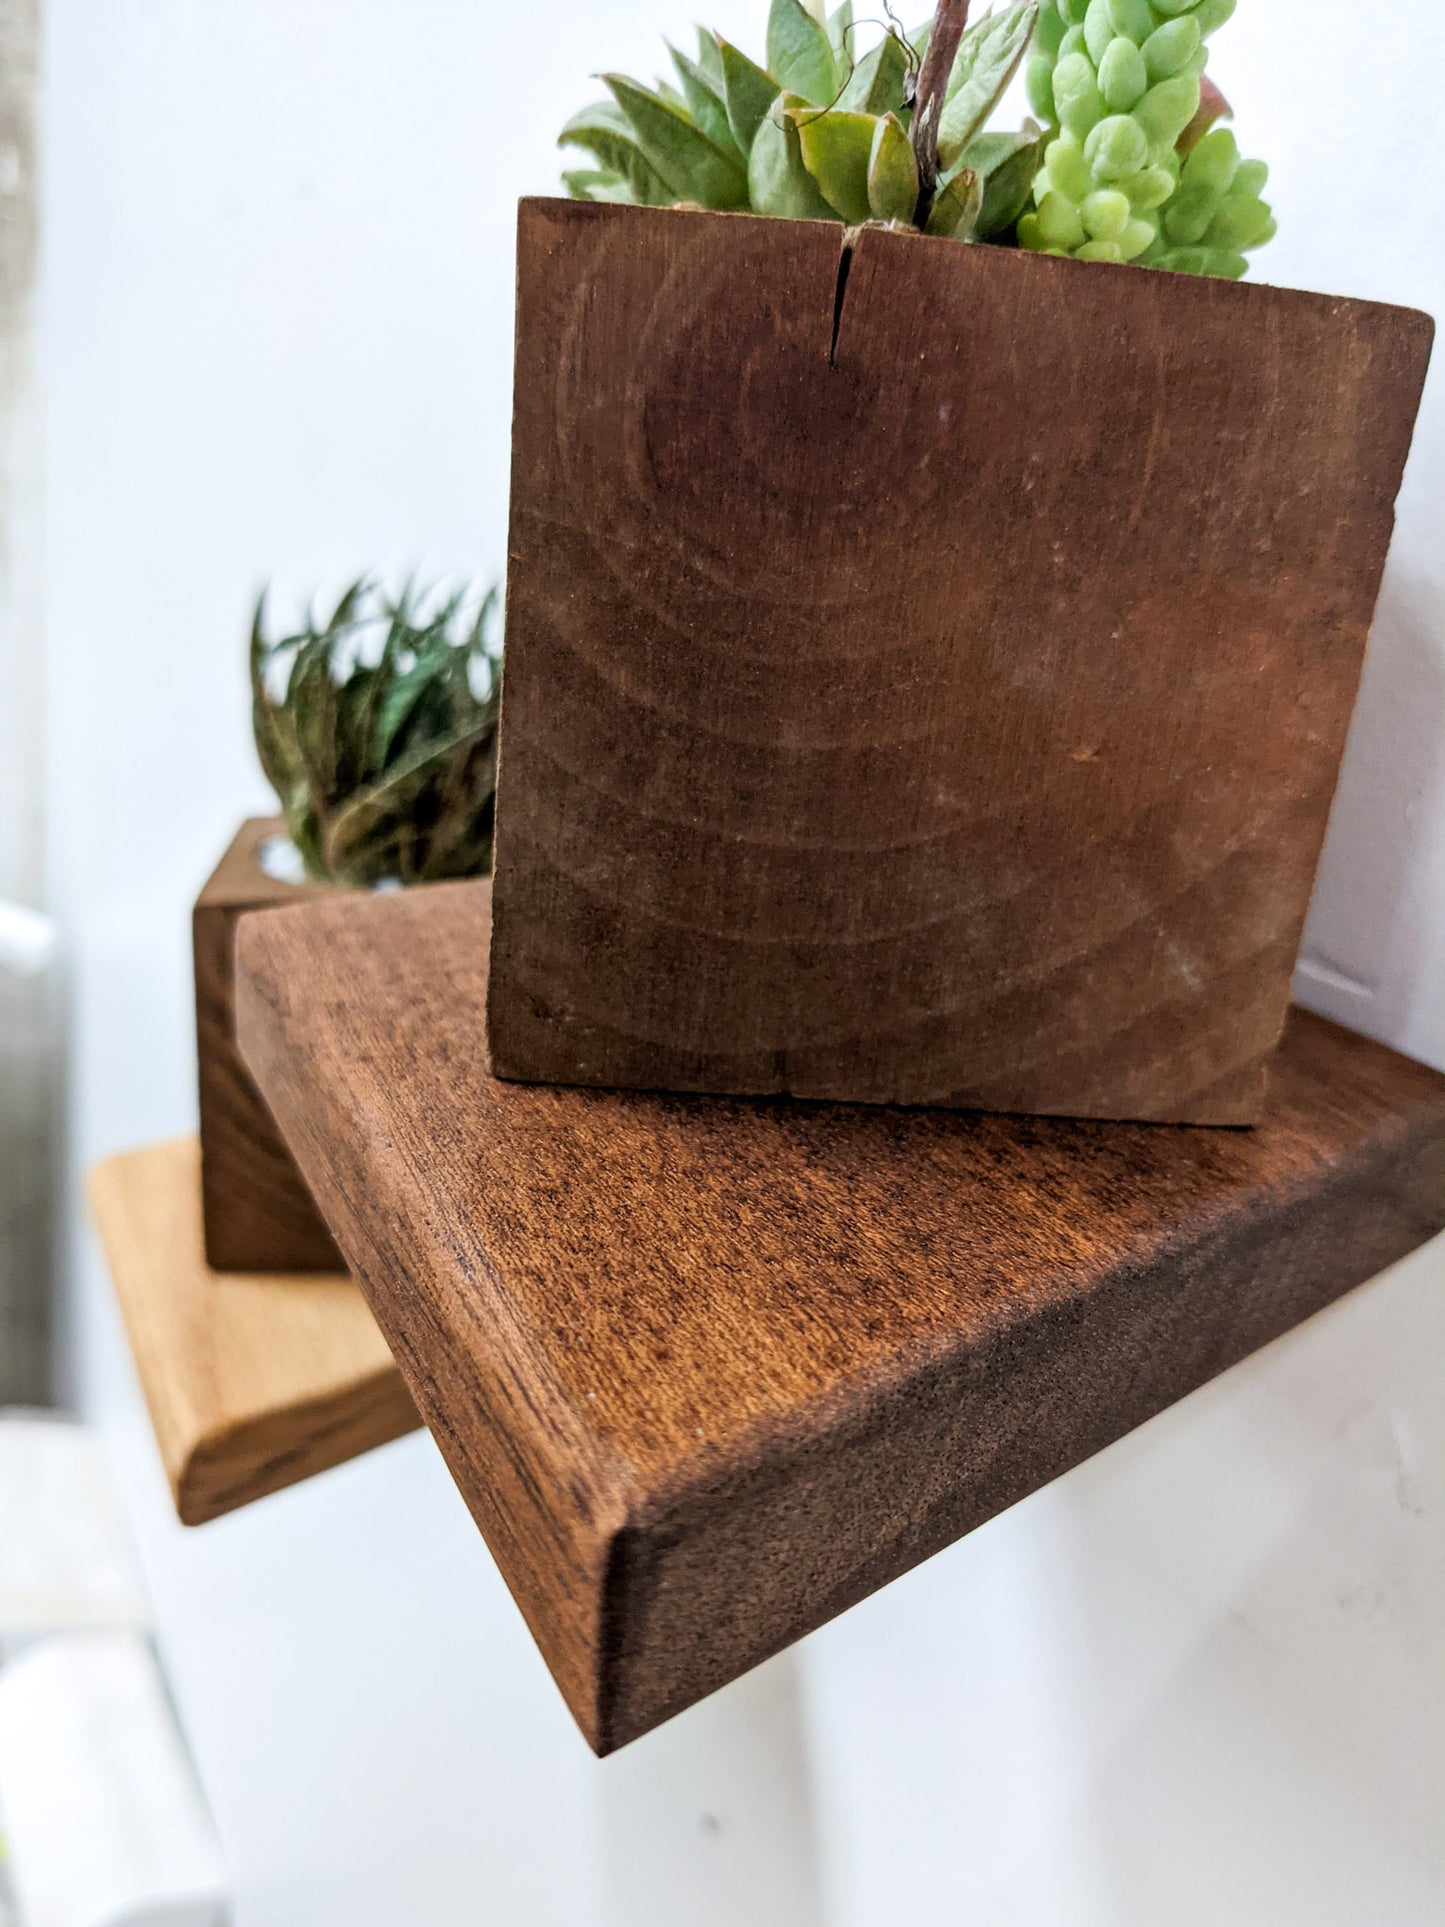 A close up side view of the small oak rhombus floating shelf. The tannish brown grain of the wood is highlighted along with the soft bevelled edges. On top a mahogany square planter sits and is filled with succulents.